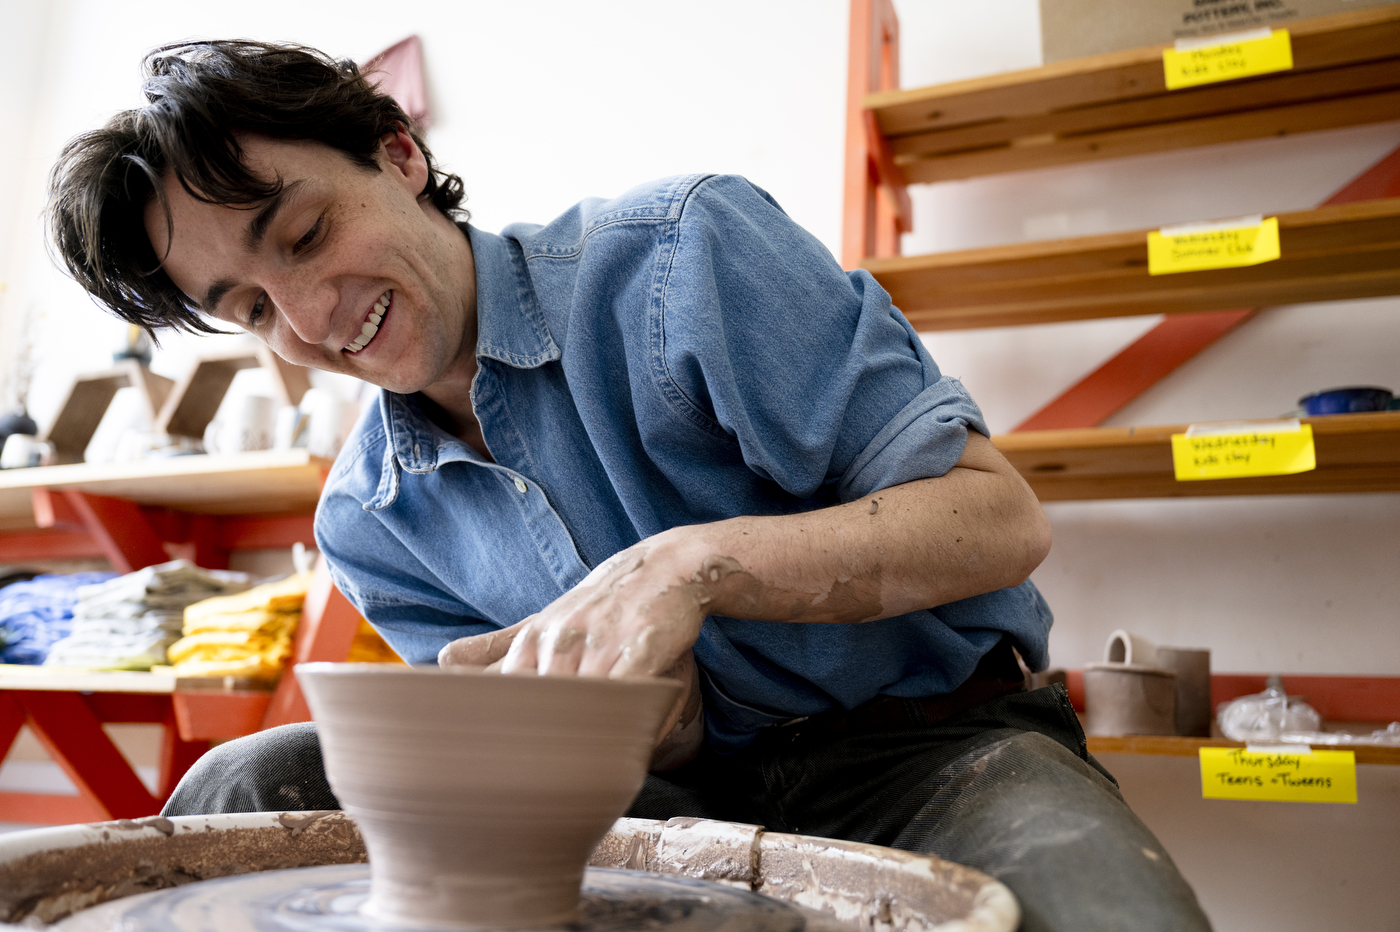 David Chatson smiling while shaping clay on the wheel.